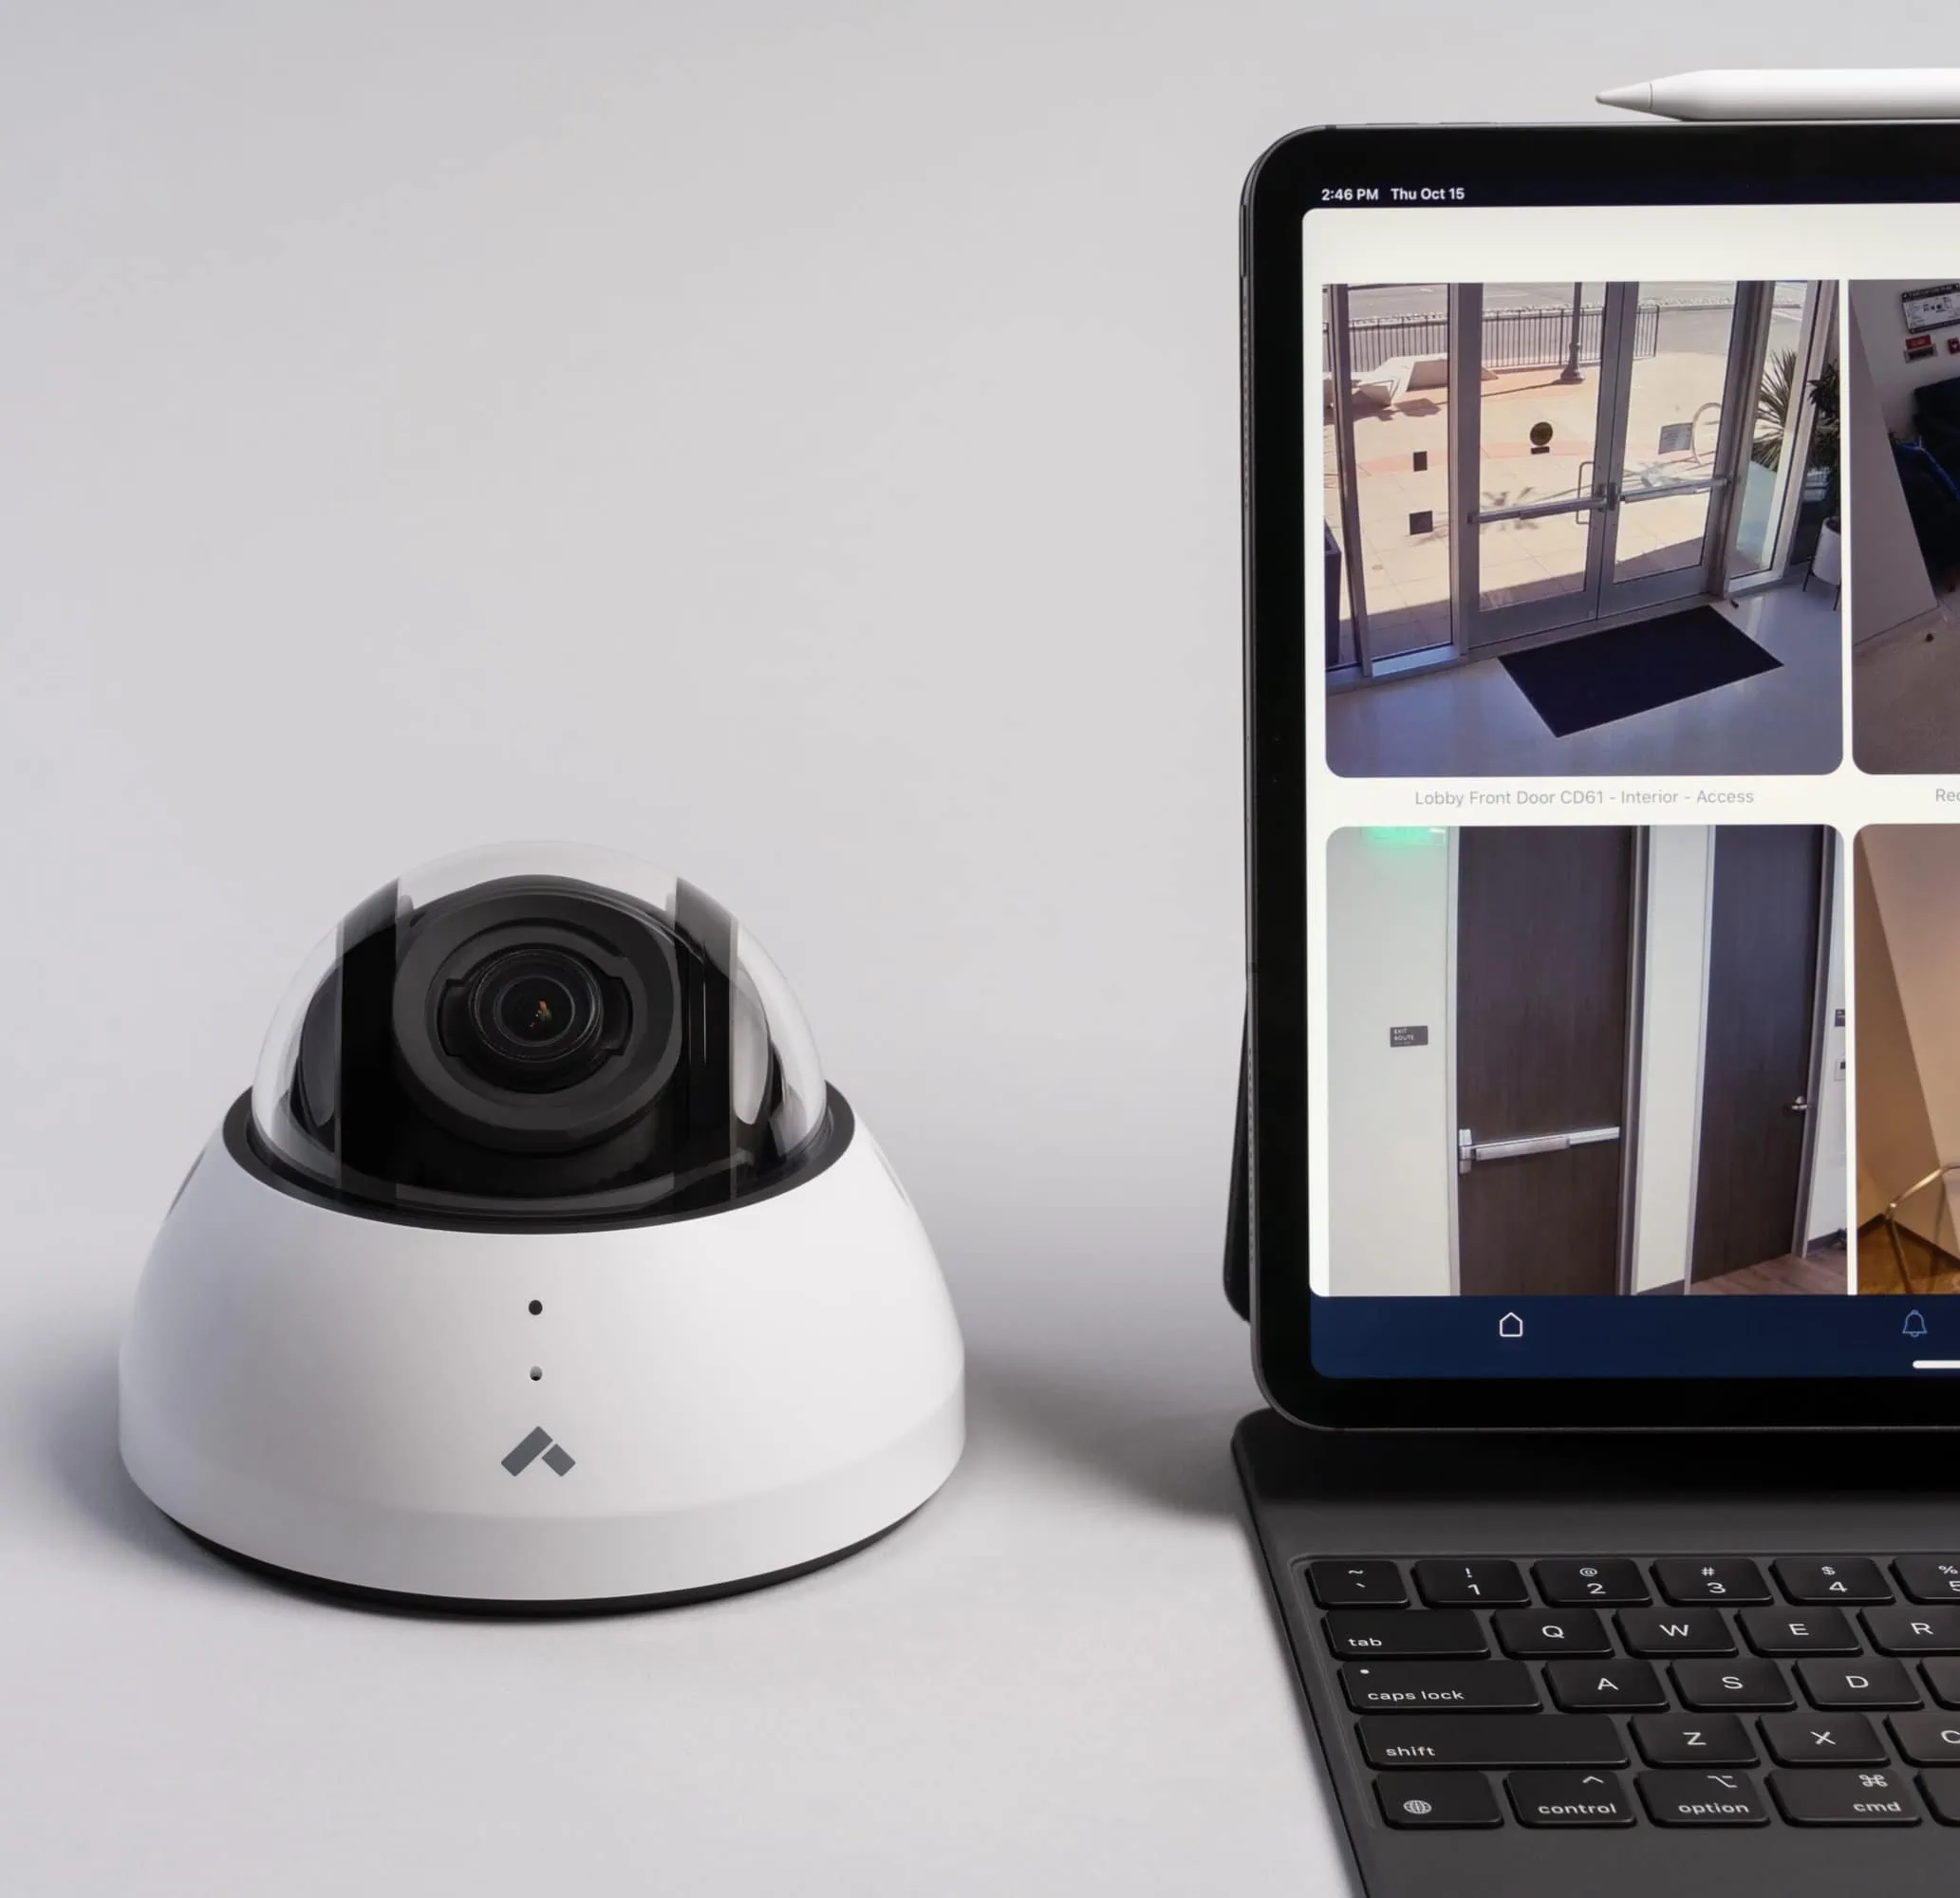 Dome camera next to laptop displaying footage from outdoor security camera systems with night vision